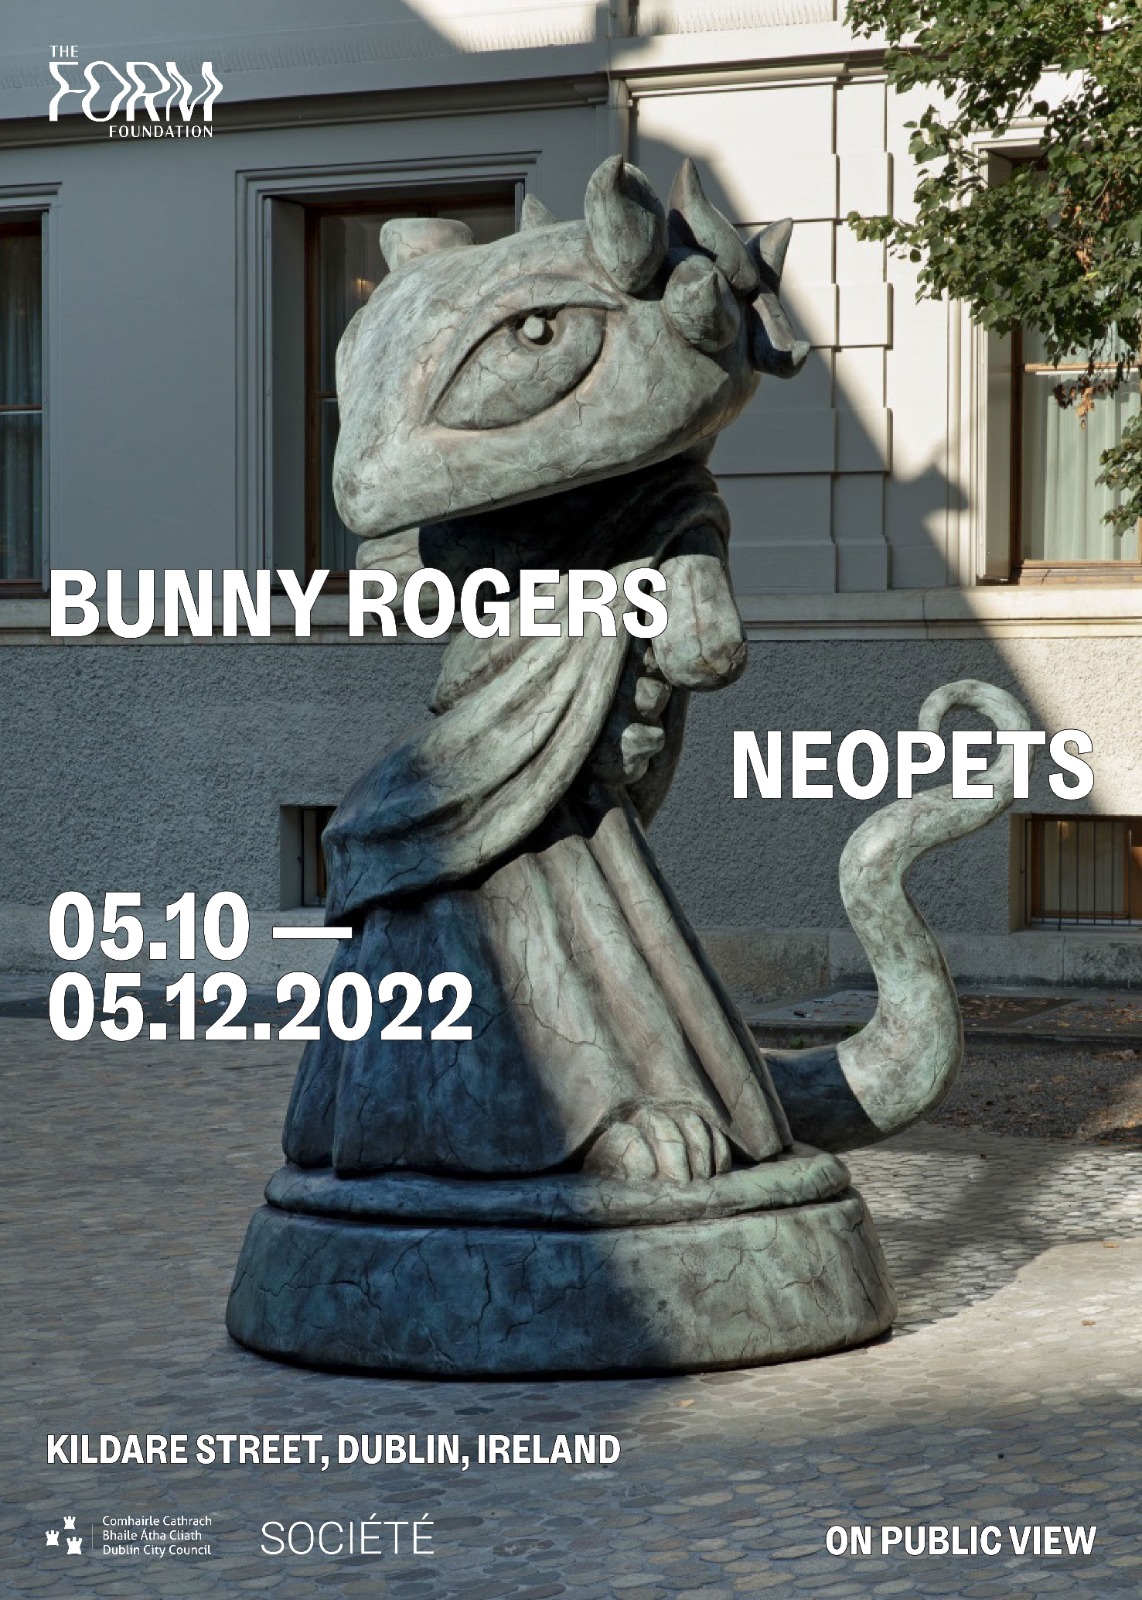 The Bunny Rogers NEOPETS exhibition